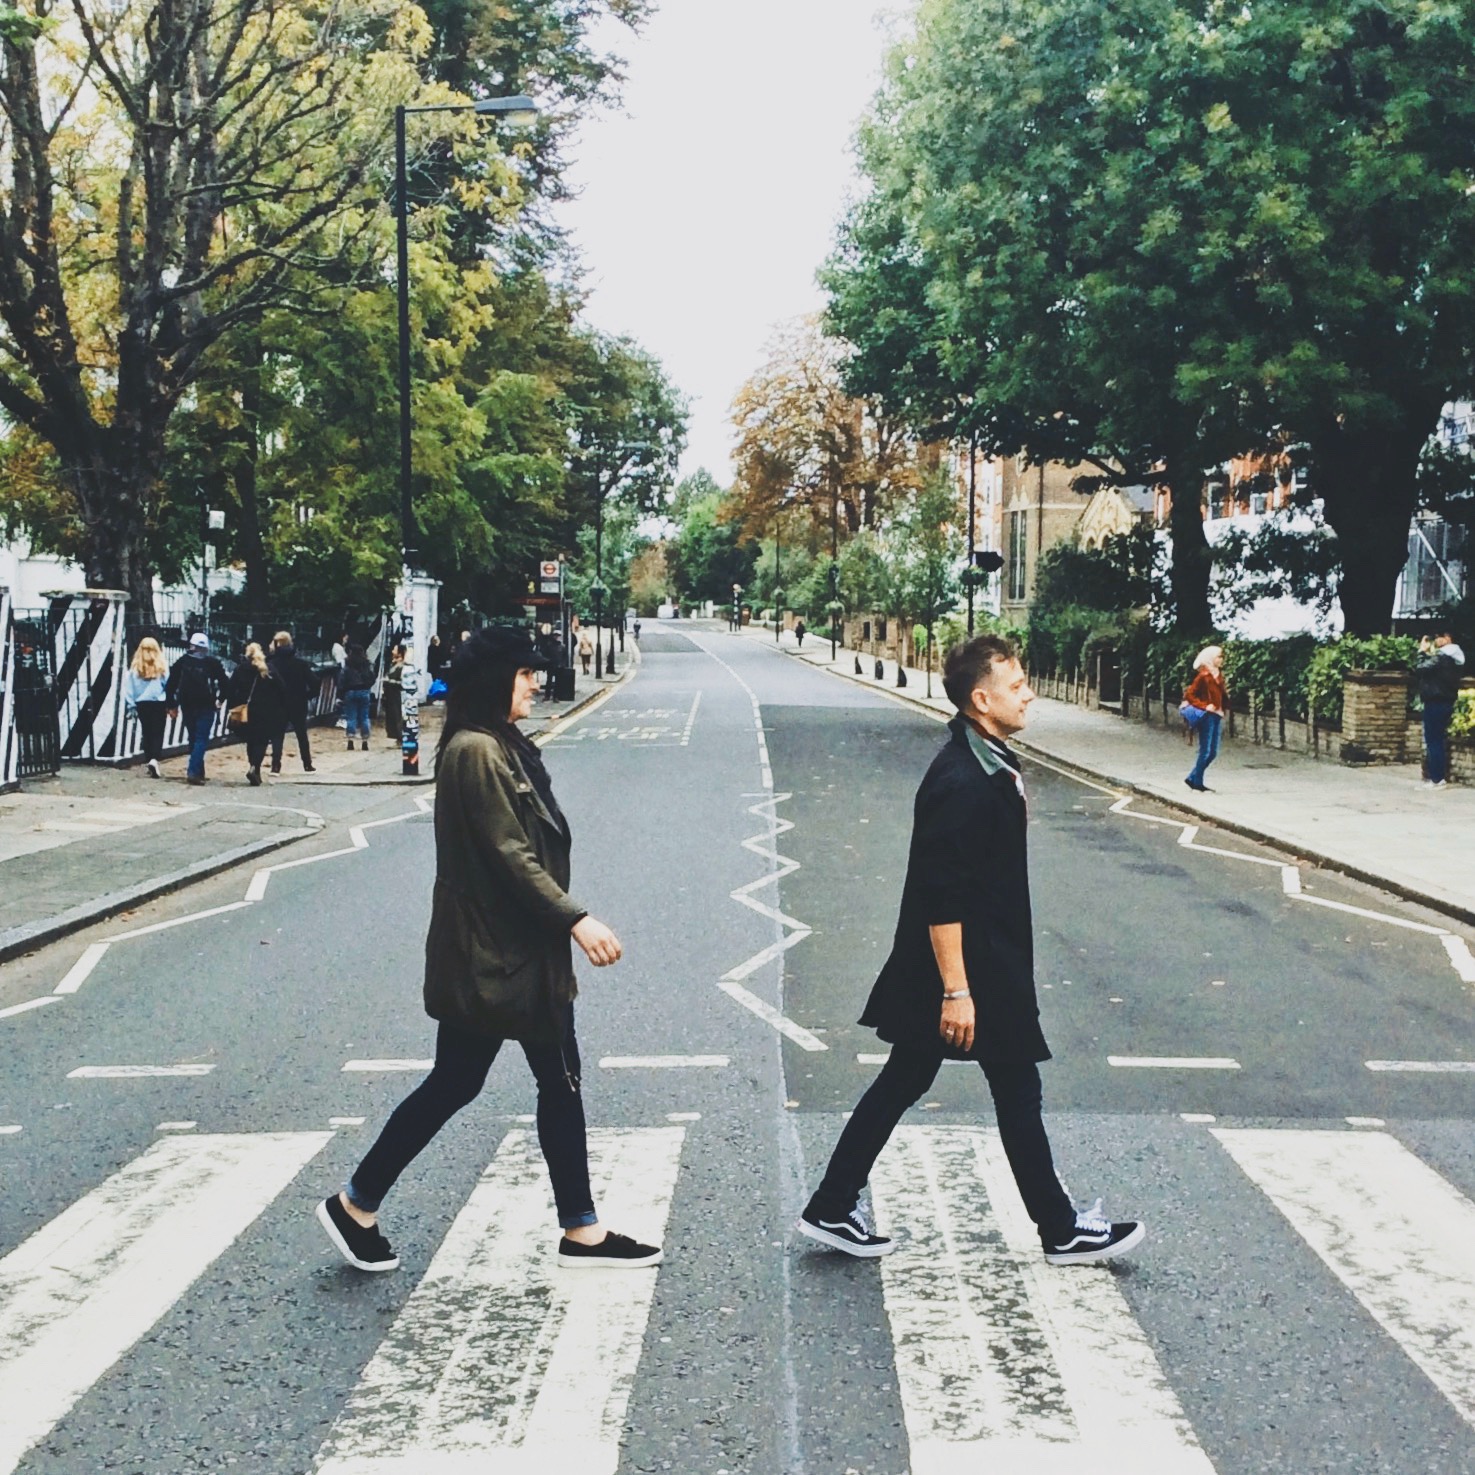 Stephen & Andie cross the street at the famous Abbey Road crossing in London, England